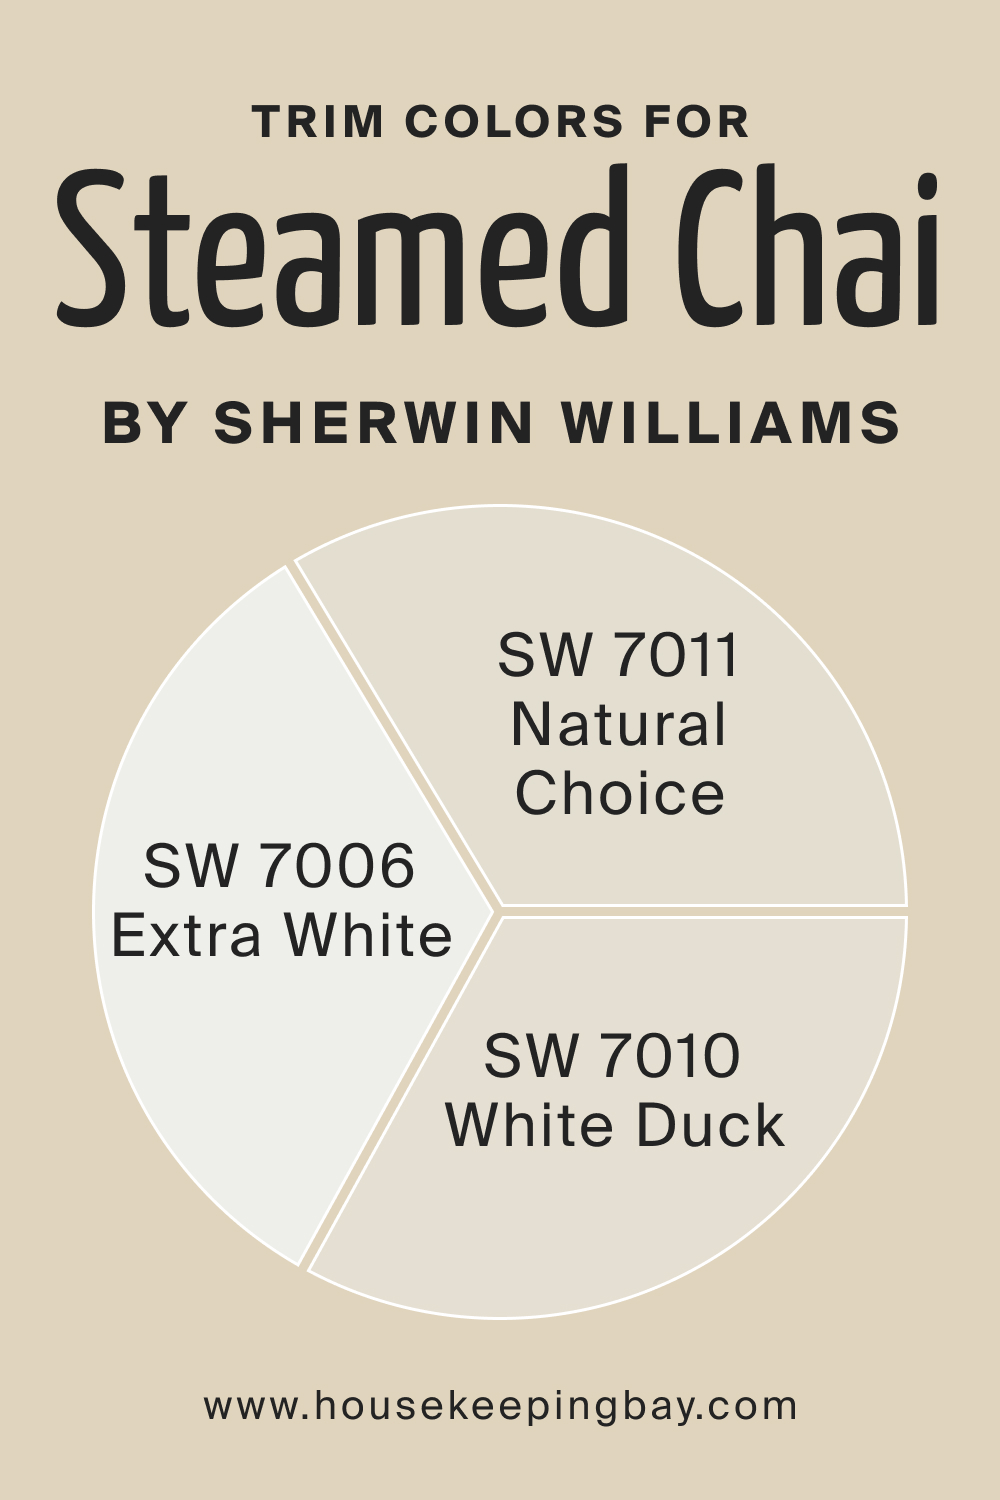 Trim Colors of SW 9509 Steamed Chai by Sherwin Williams